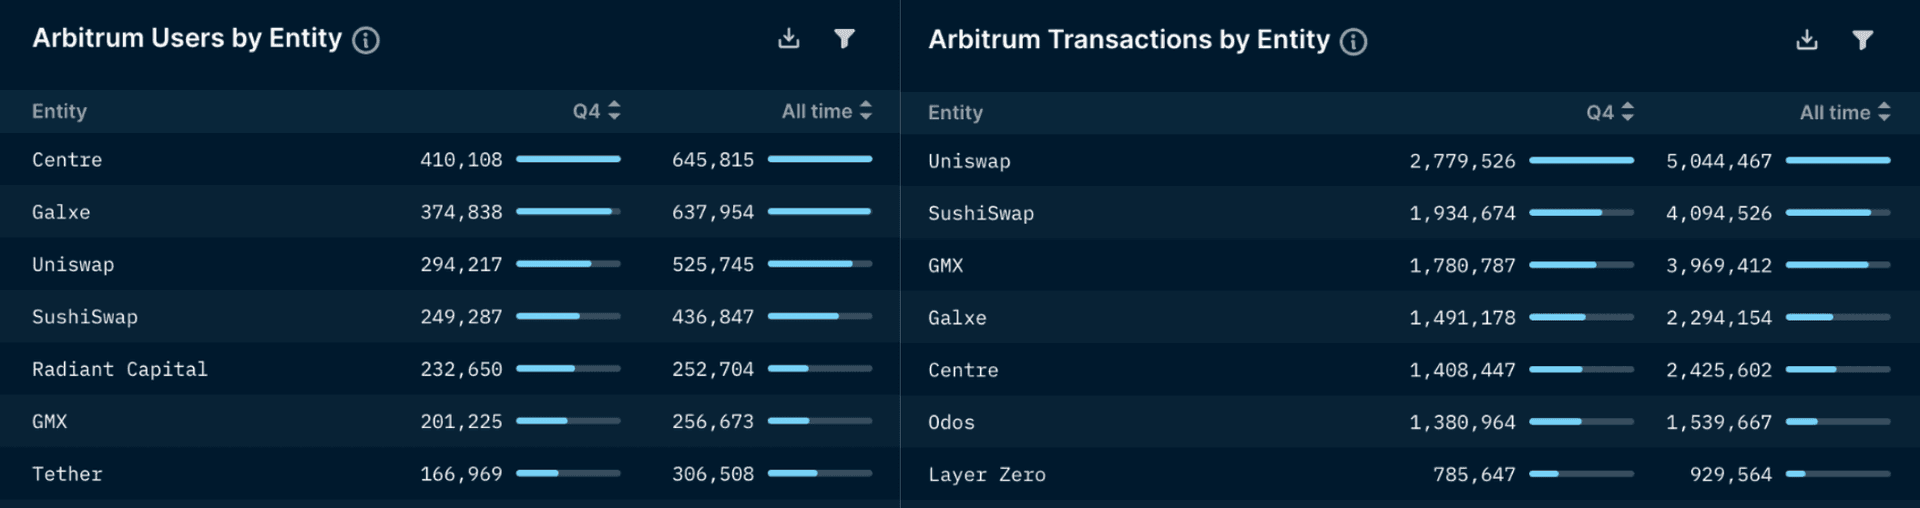 Top Entities by Users and Transactions (excluding entities with “Unknown” labels)